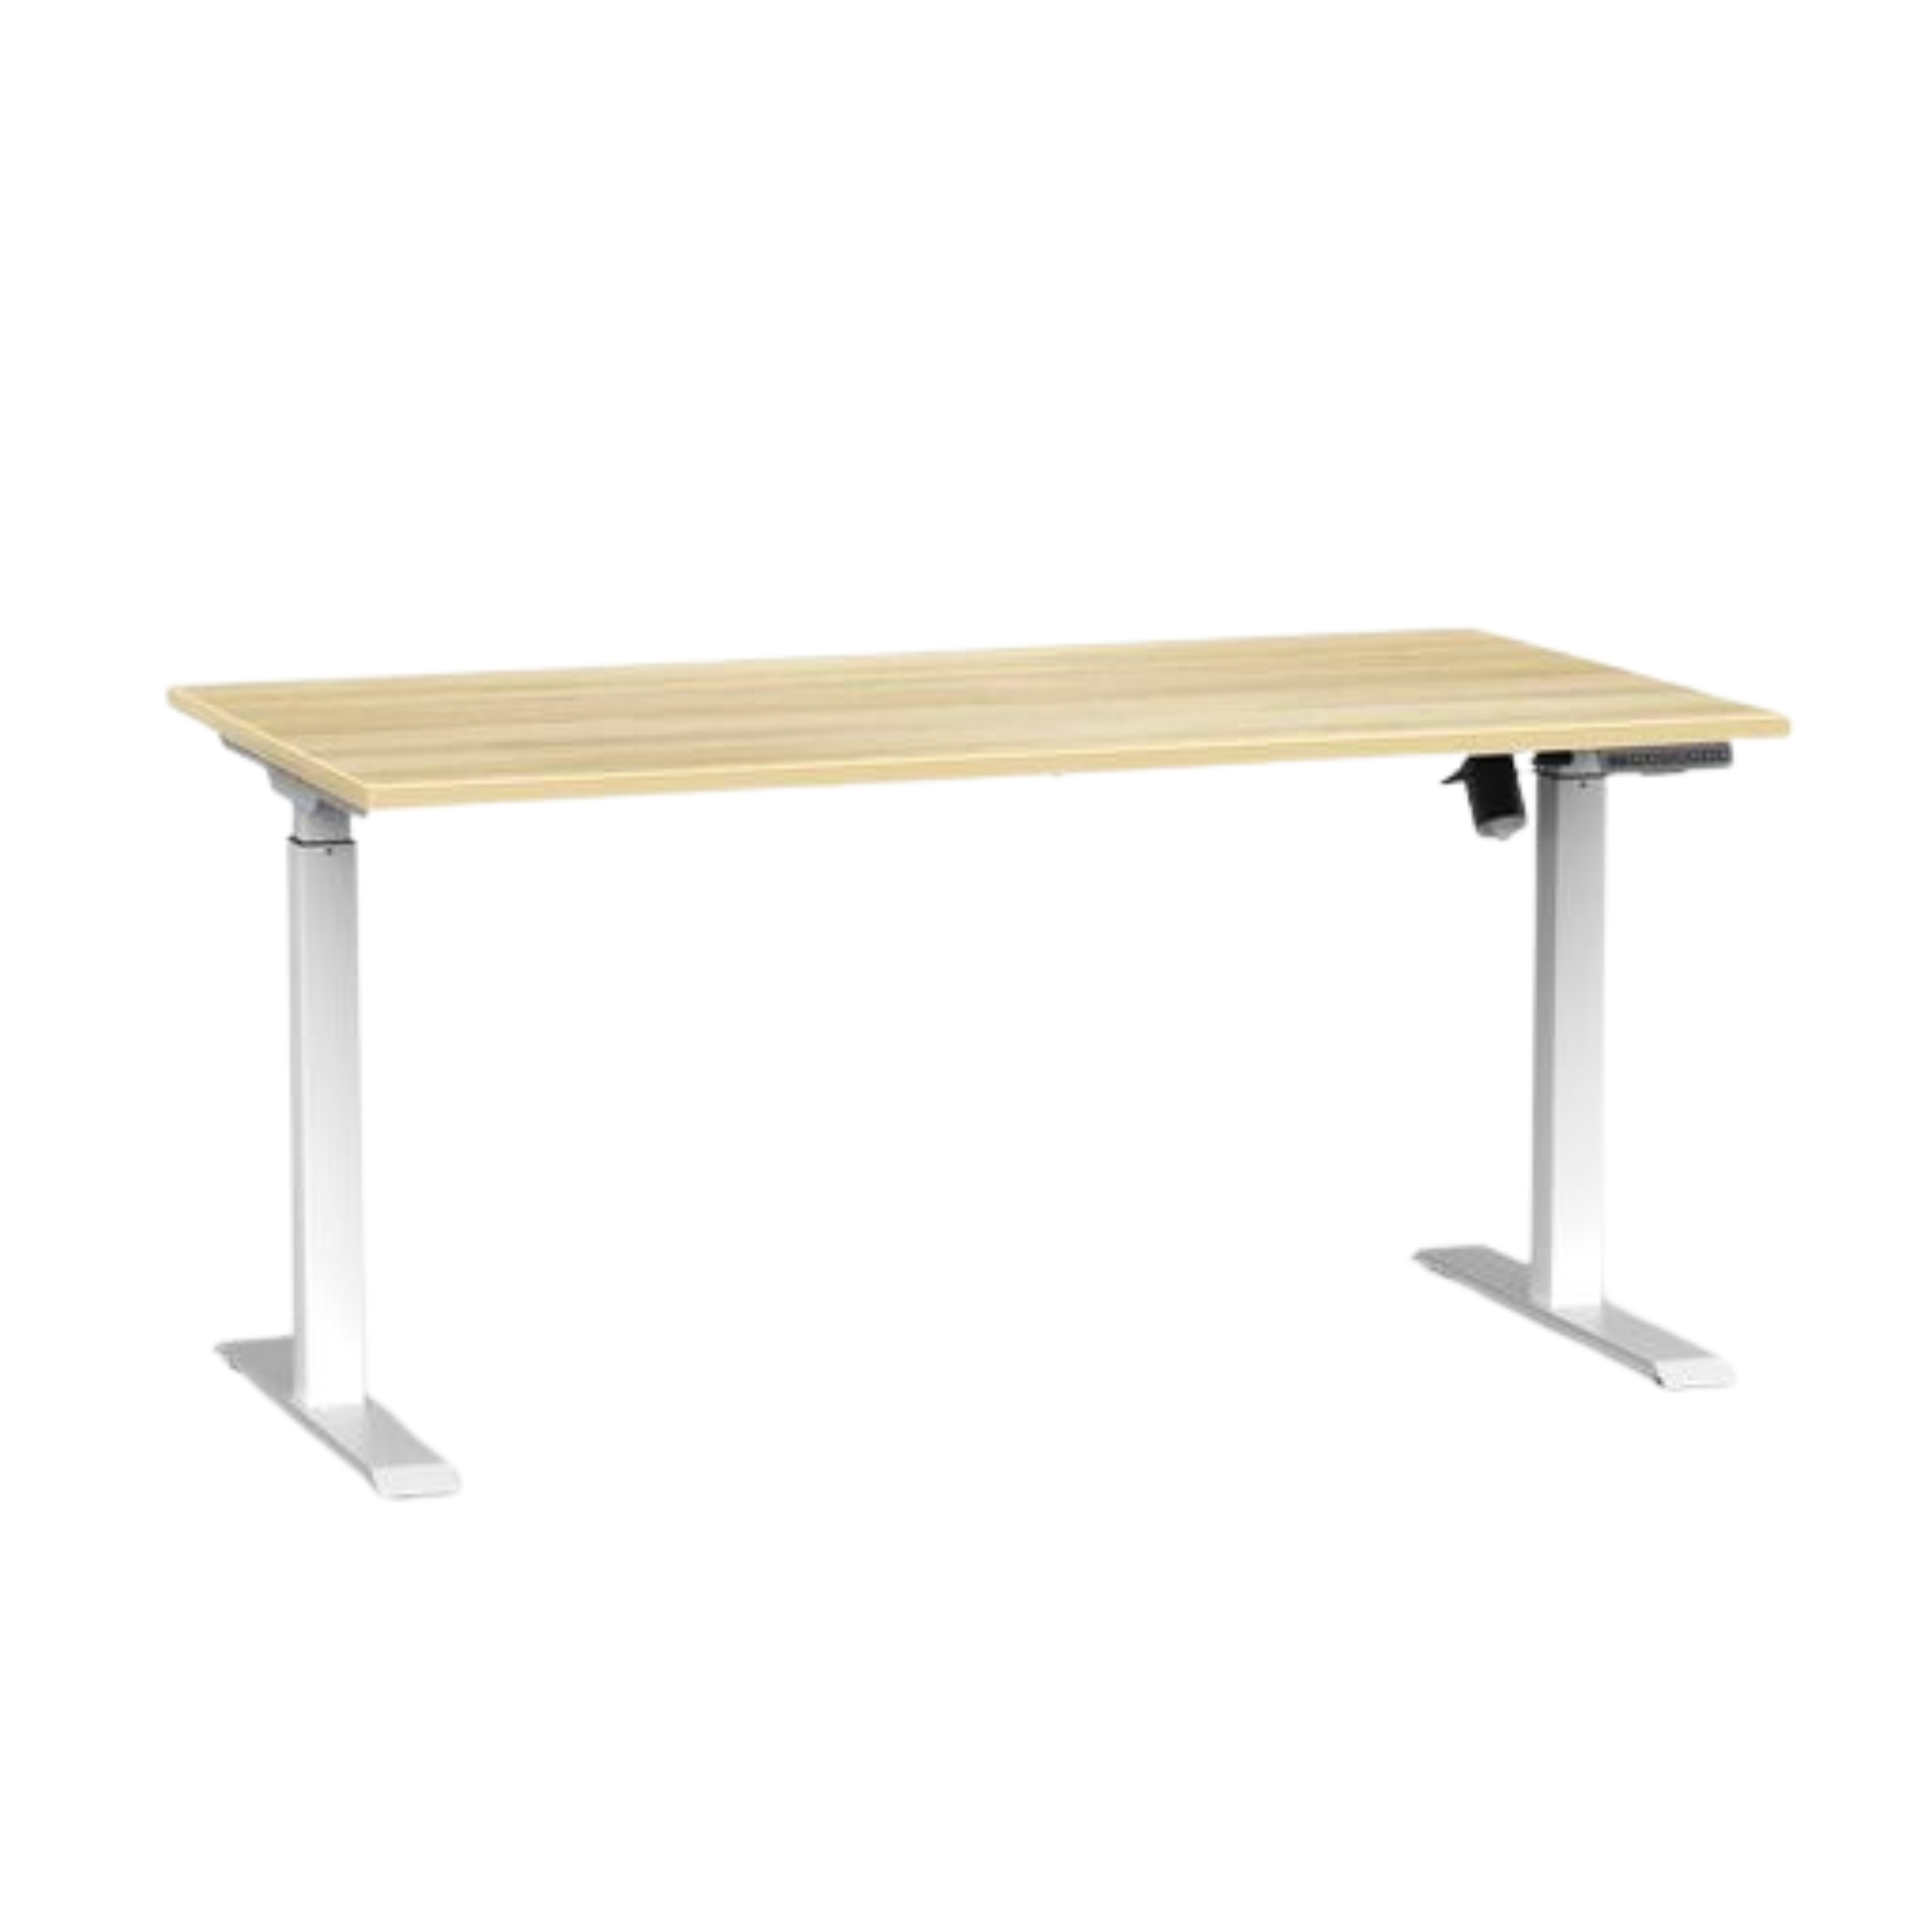 Agile boost electric sit to stand desk with white frame and atlantic oak top